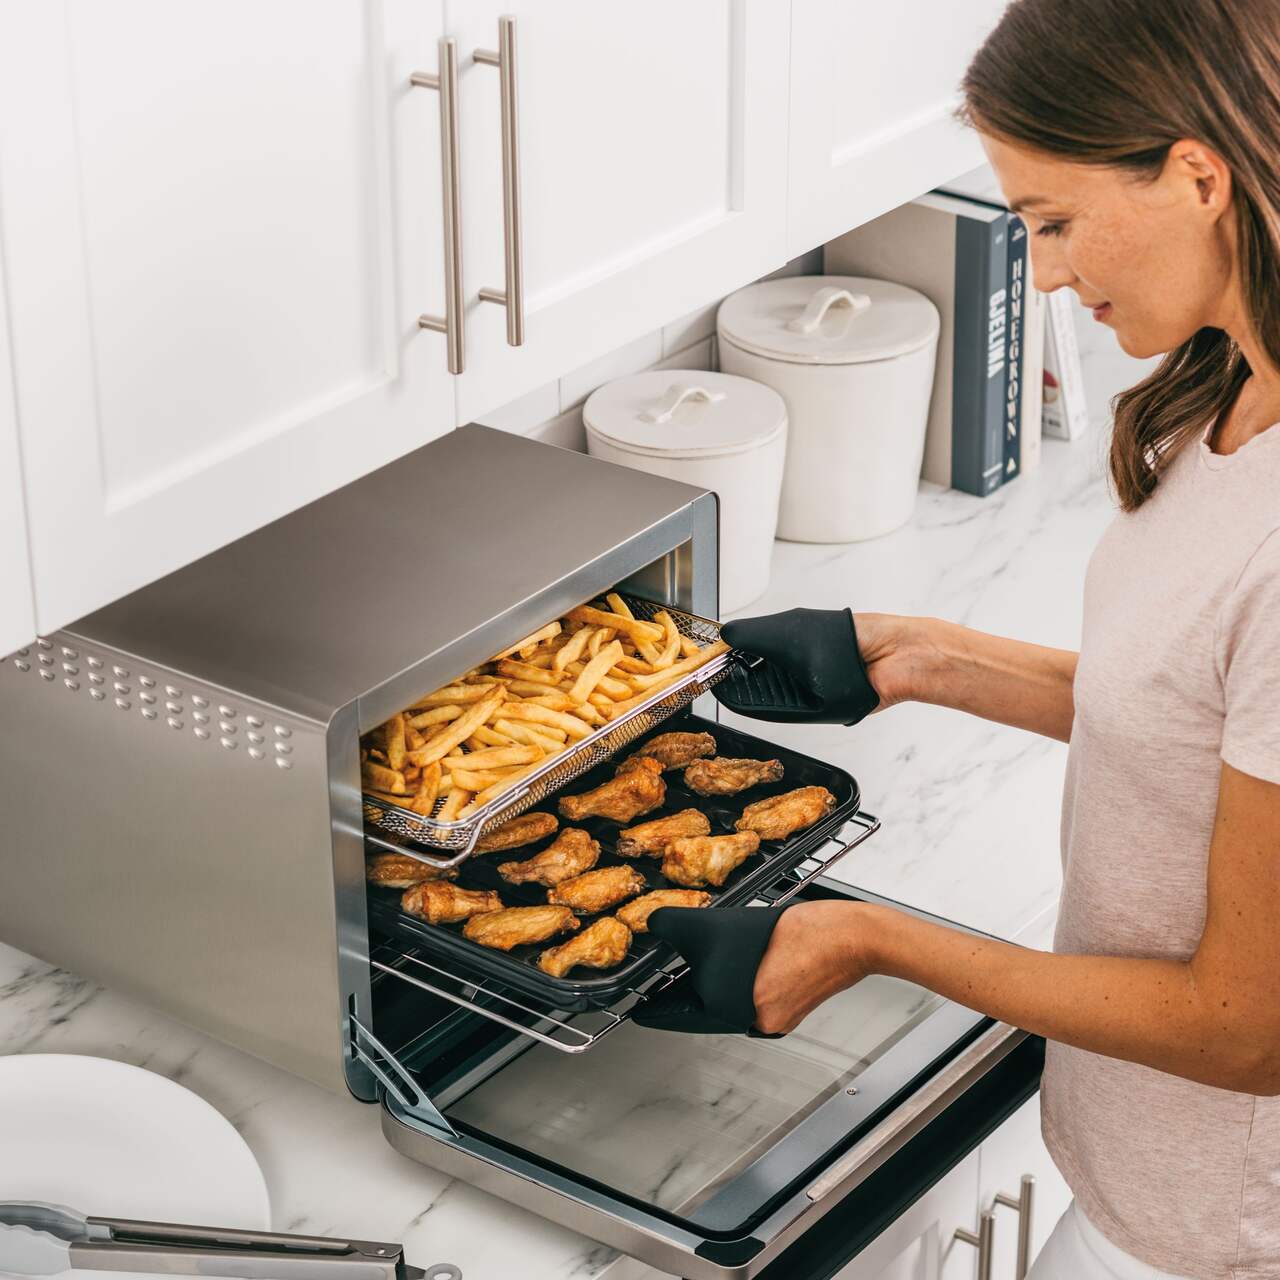 https://media-www.canadiantire.ca/product/living/kitchen/kitchen-appliances/0430954/ninja-foodi-10-in-1-xl-pro-air-fry-oven-259f01d6-0154-4e0d-93ad-f86961ef6a98-jpgrendition.jpg?imdensity=1&imwidth=1244&impolicy=mZoom